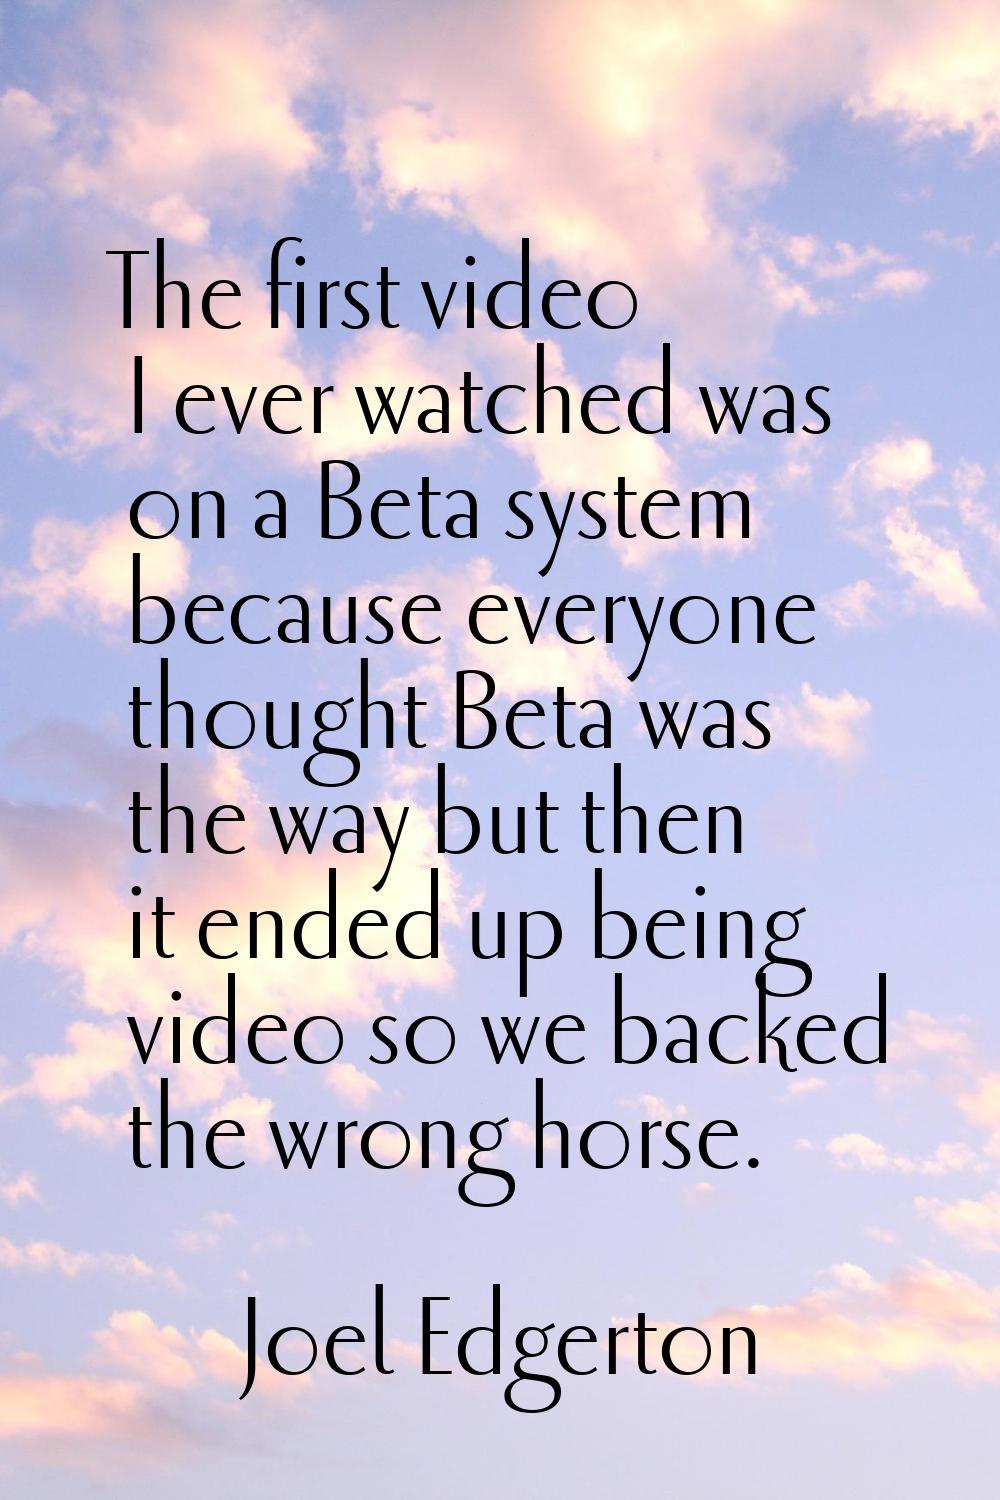 The first video I ever watched was on a Beta system because everyone thought Beta was the way but t